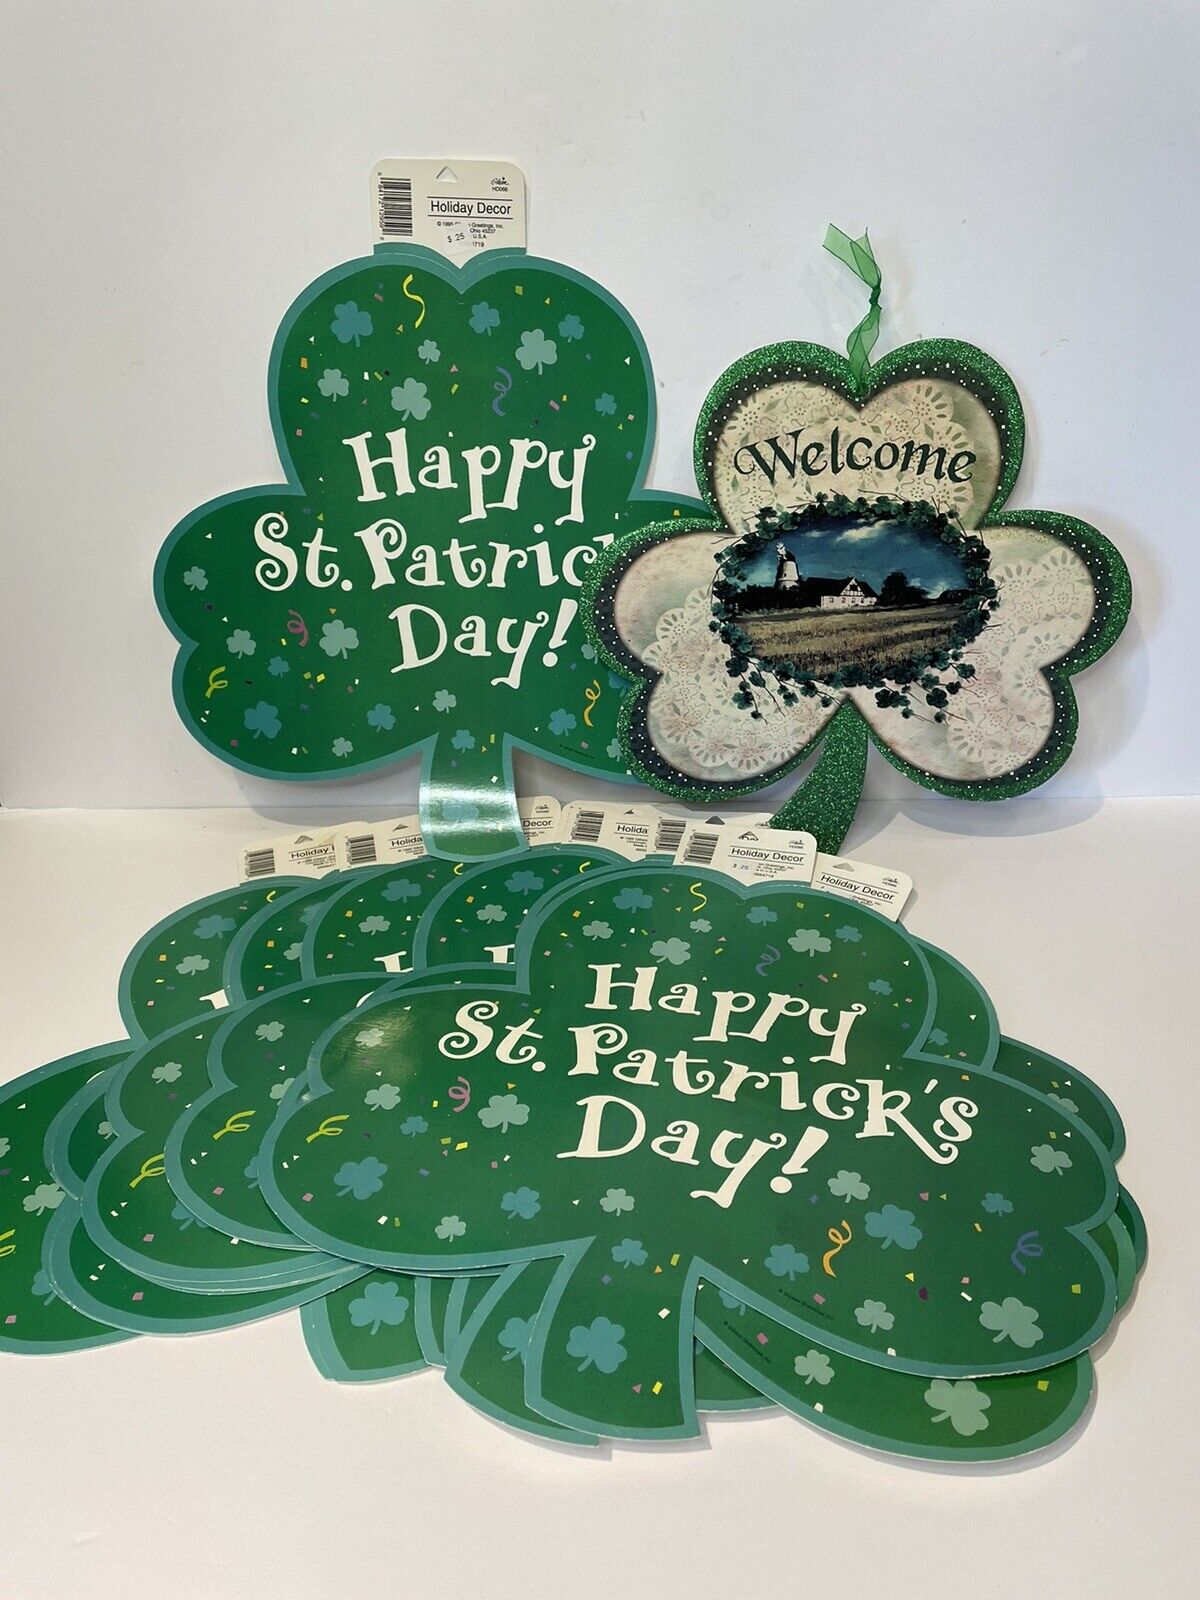 Lot of 14 NOS 1995 Gibson Greetings Paper Shamrock Happy St. Patrick’s Day